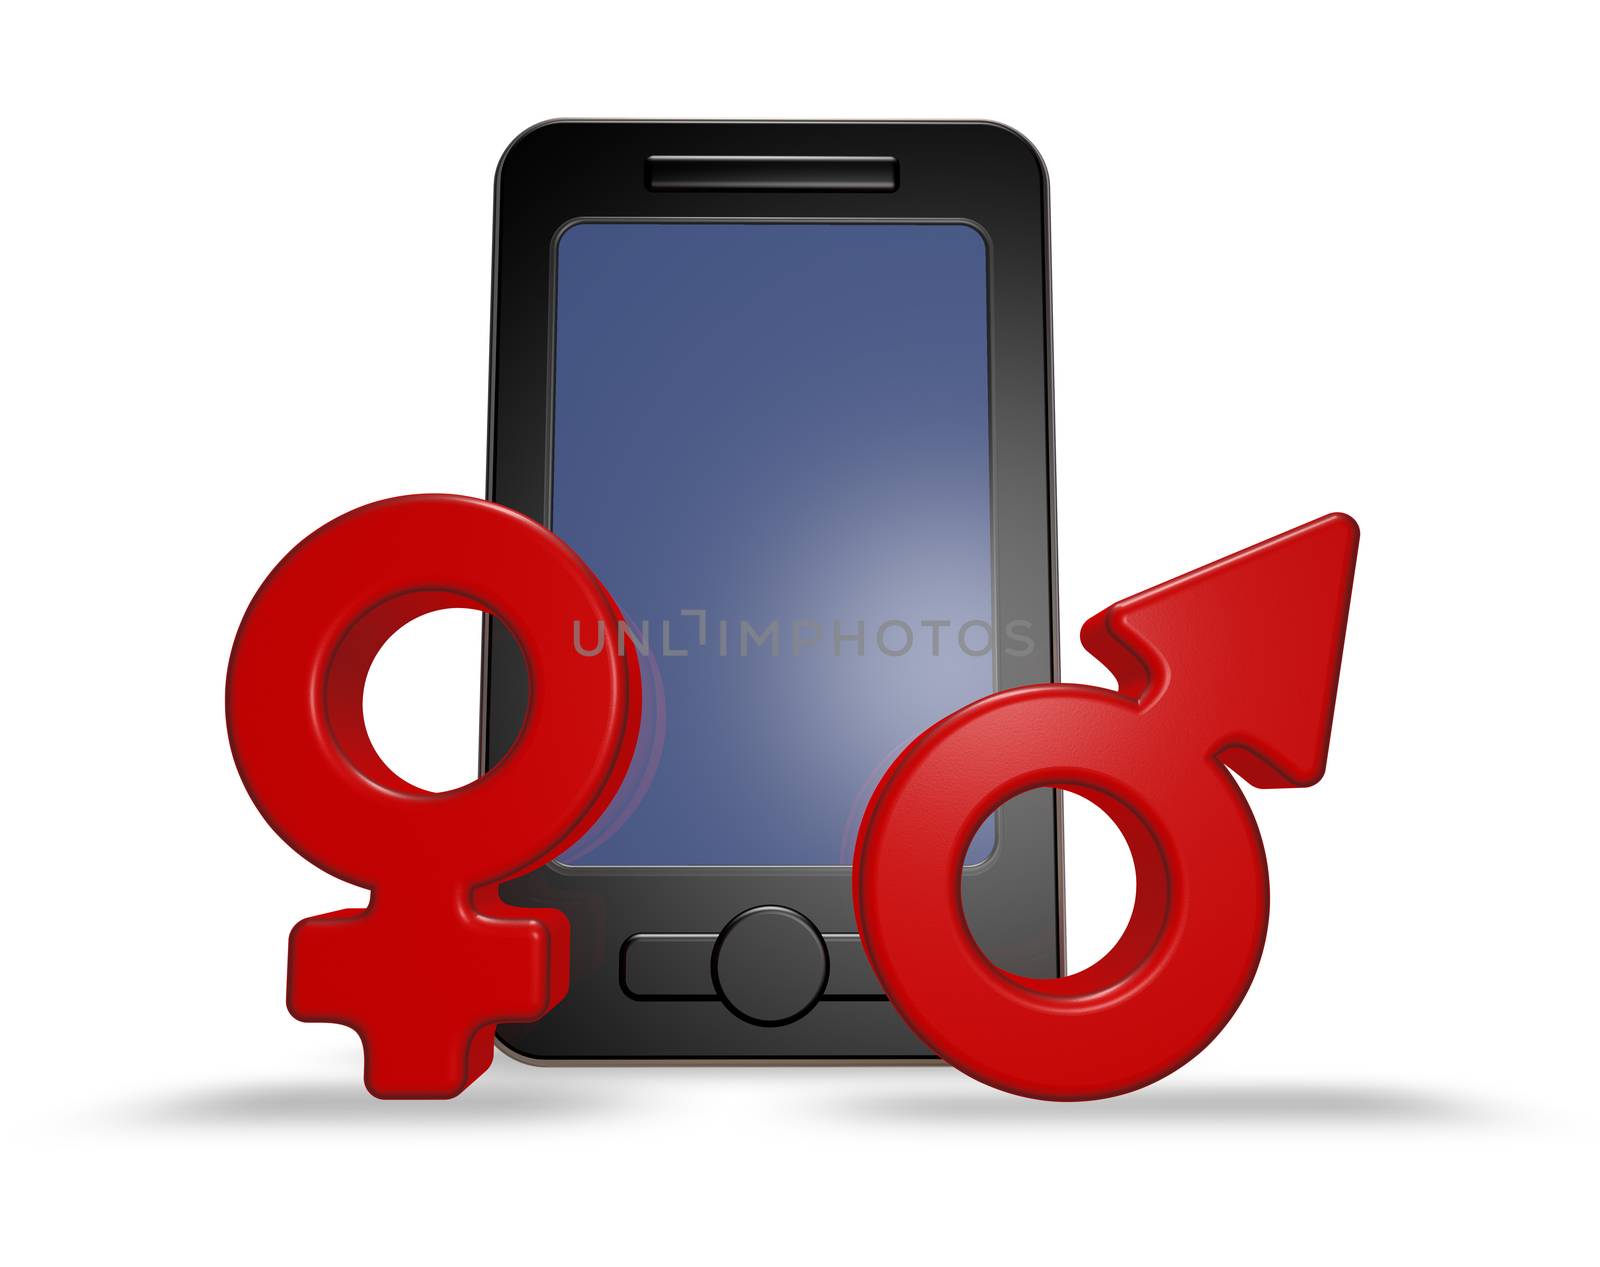 smartphone with male and female symbol - 3d illustration